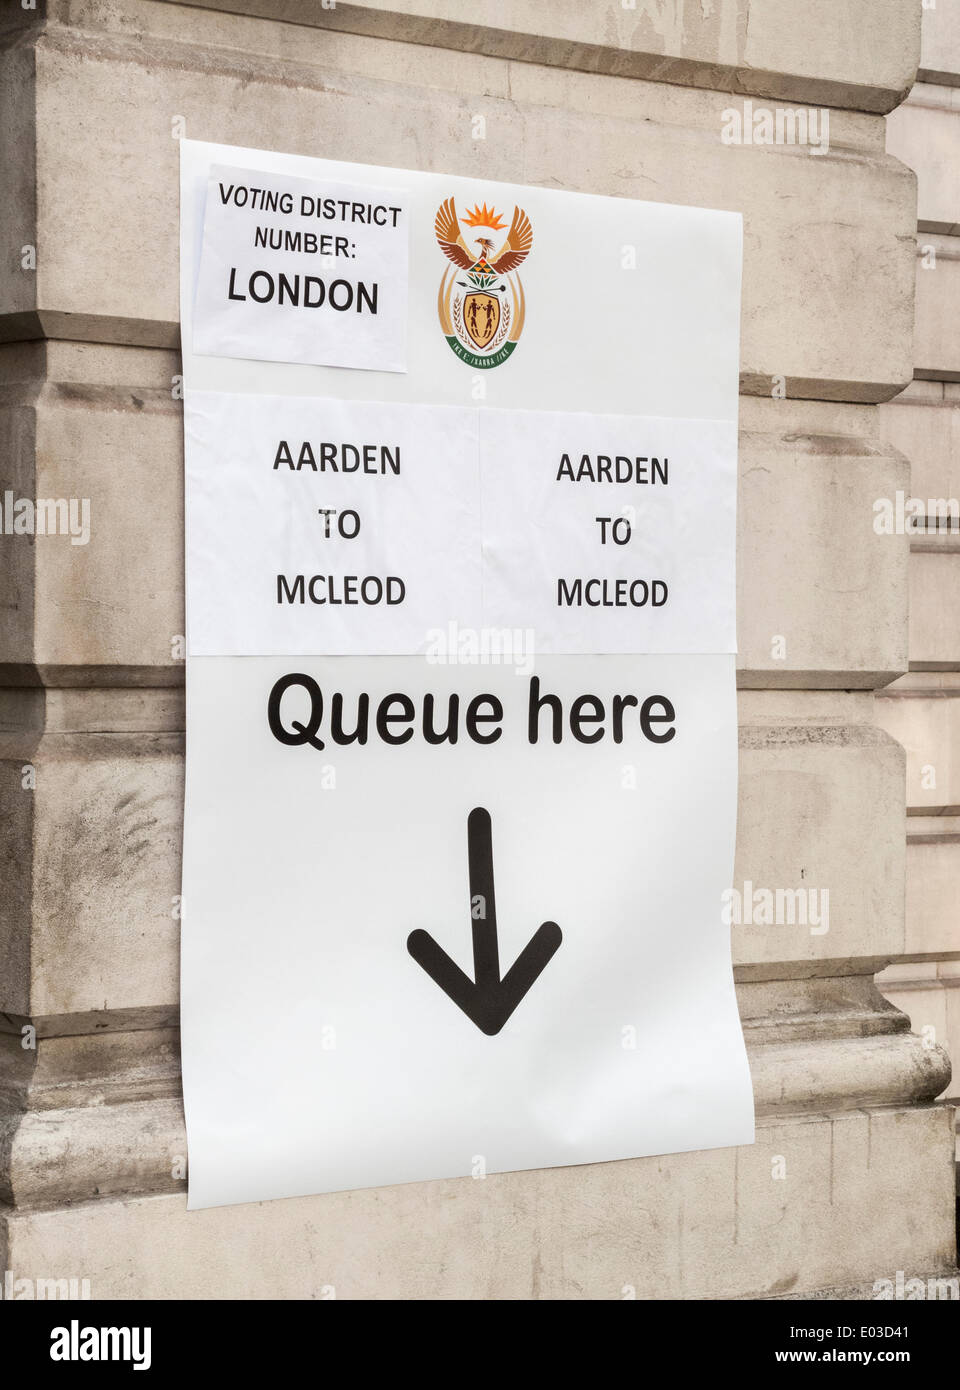 London, UK . 30th Apr, 2014. 30 April 2014 is the date on which expat voters may vote in the South African General Election, voting in the United Kingdom being at the South African High Commission, South Africa House, Trafalgar Square, London WC2.   This sign directed voters to the correct queue for persons named Aarden to Mcleod. Credit:  Graham Prentice/Alamy Live News Stock Photo